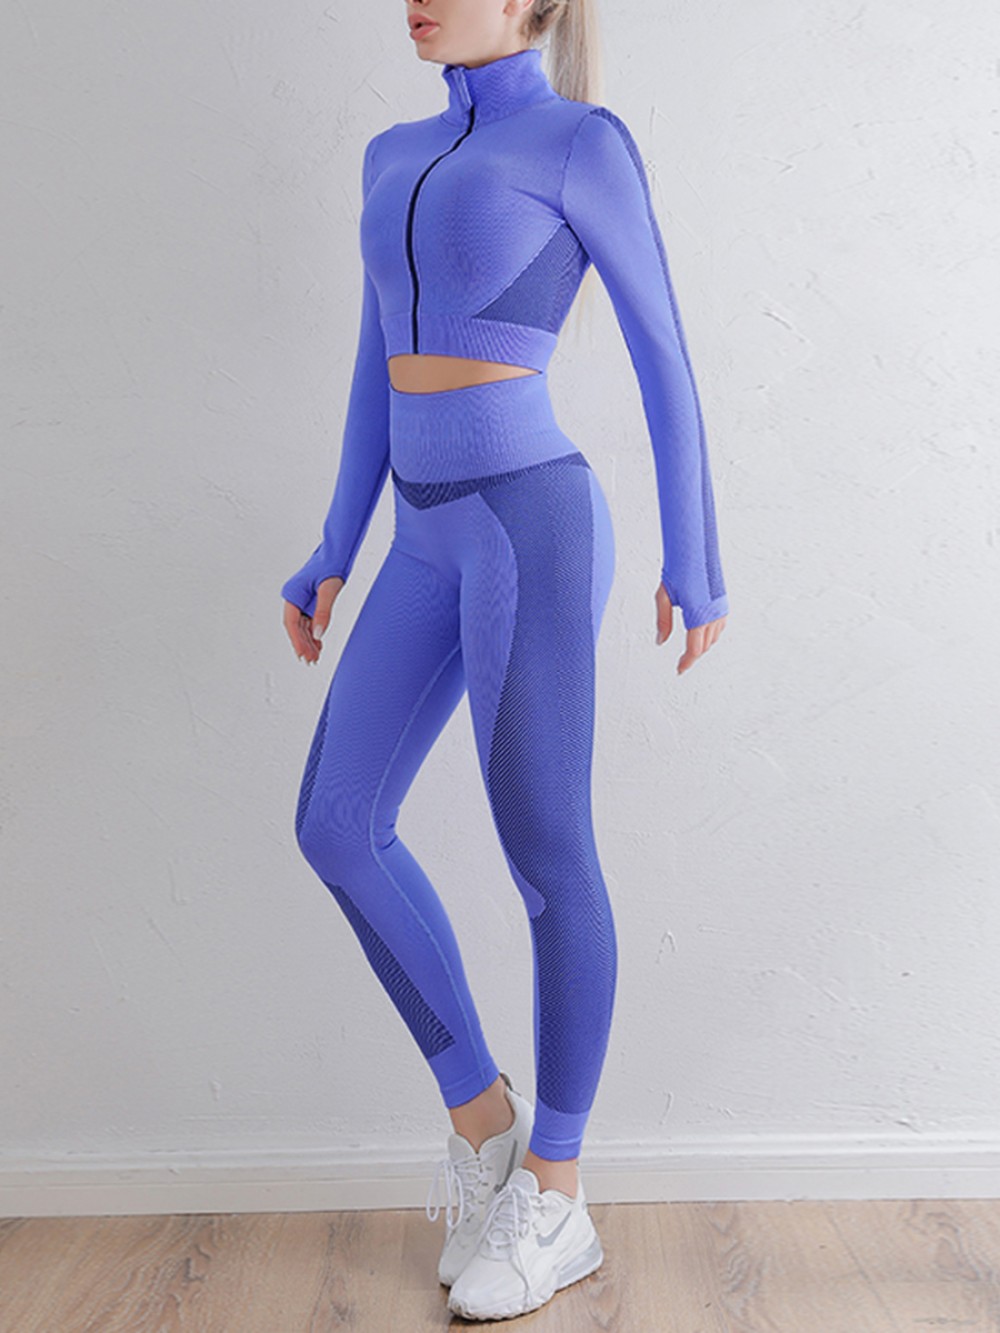 Blue Yoga Suit Zipper Thumbhole Full Length All Over Smooth